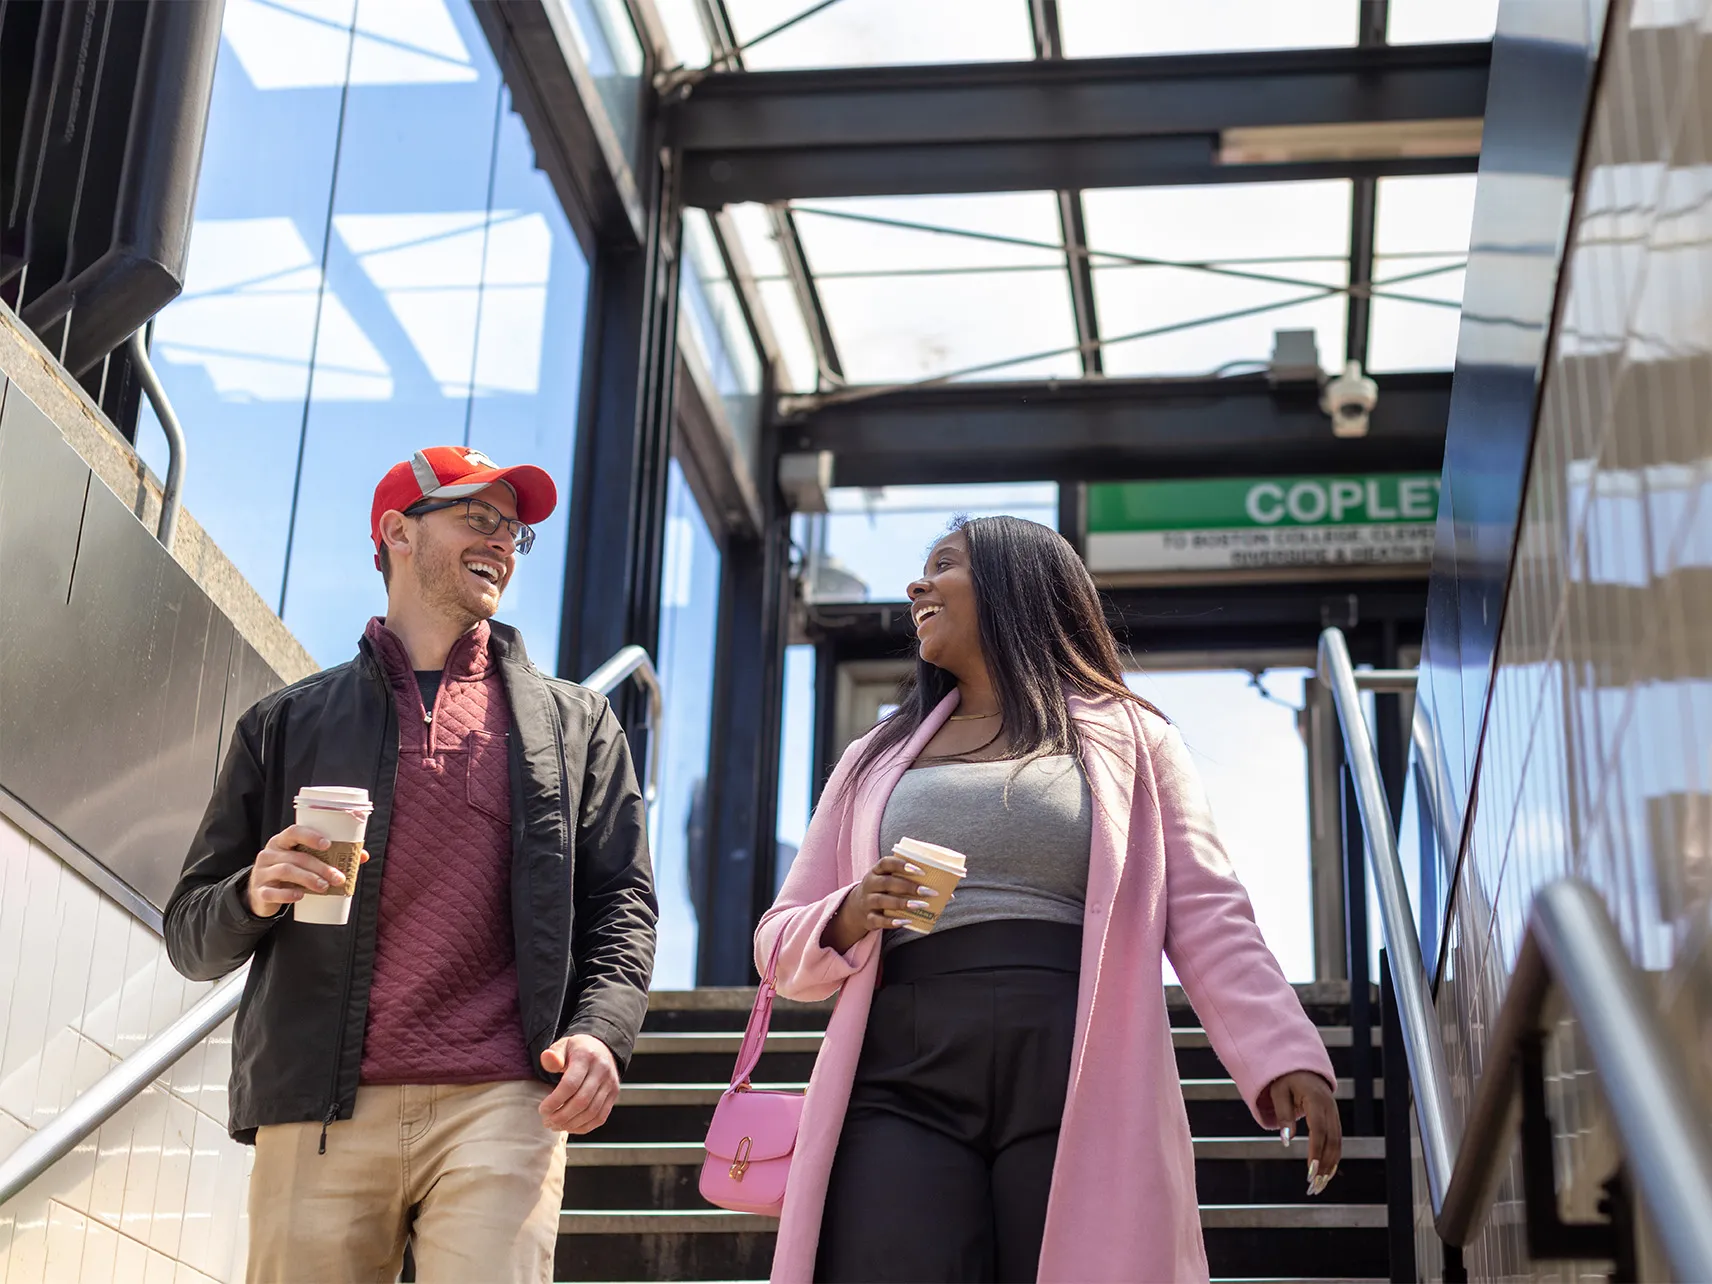 Josh Javor, a white man with glasses and a baseball cap, and Dominque McClean, a Black woman with long hair in a dress coat, smile at each other as they walk down stairs into a subway entrance.